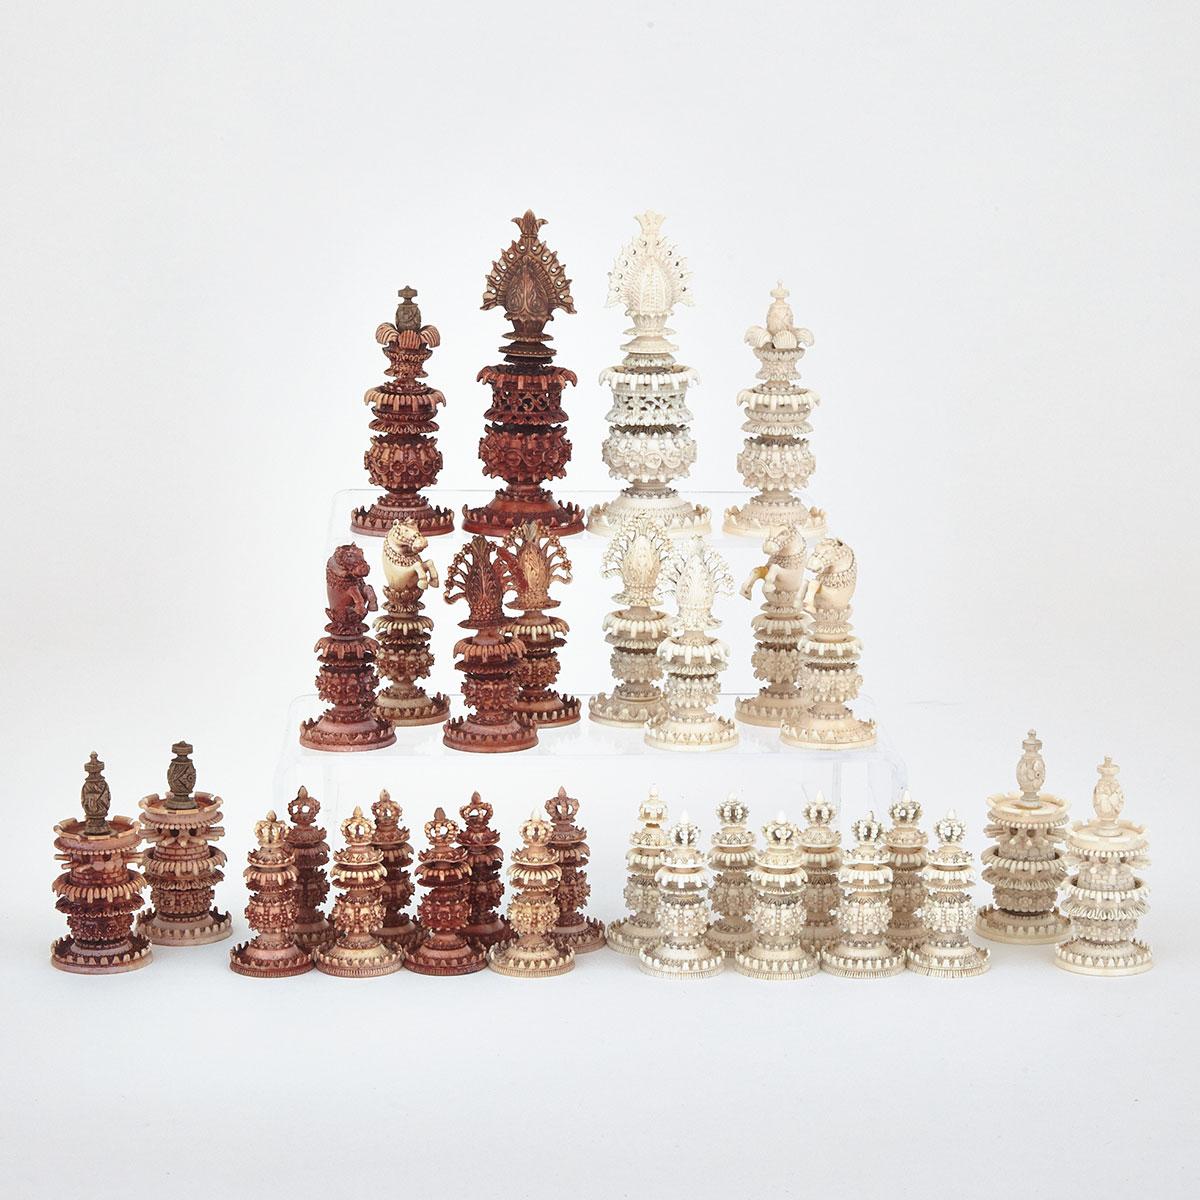 Anglo-Indian Turned and Carved Ivory Chess Set, Kashmir, early/mid 19th century